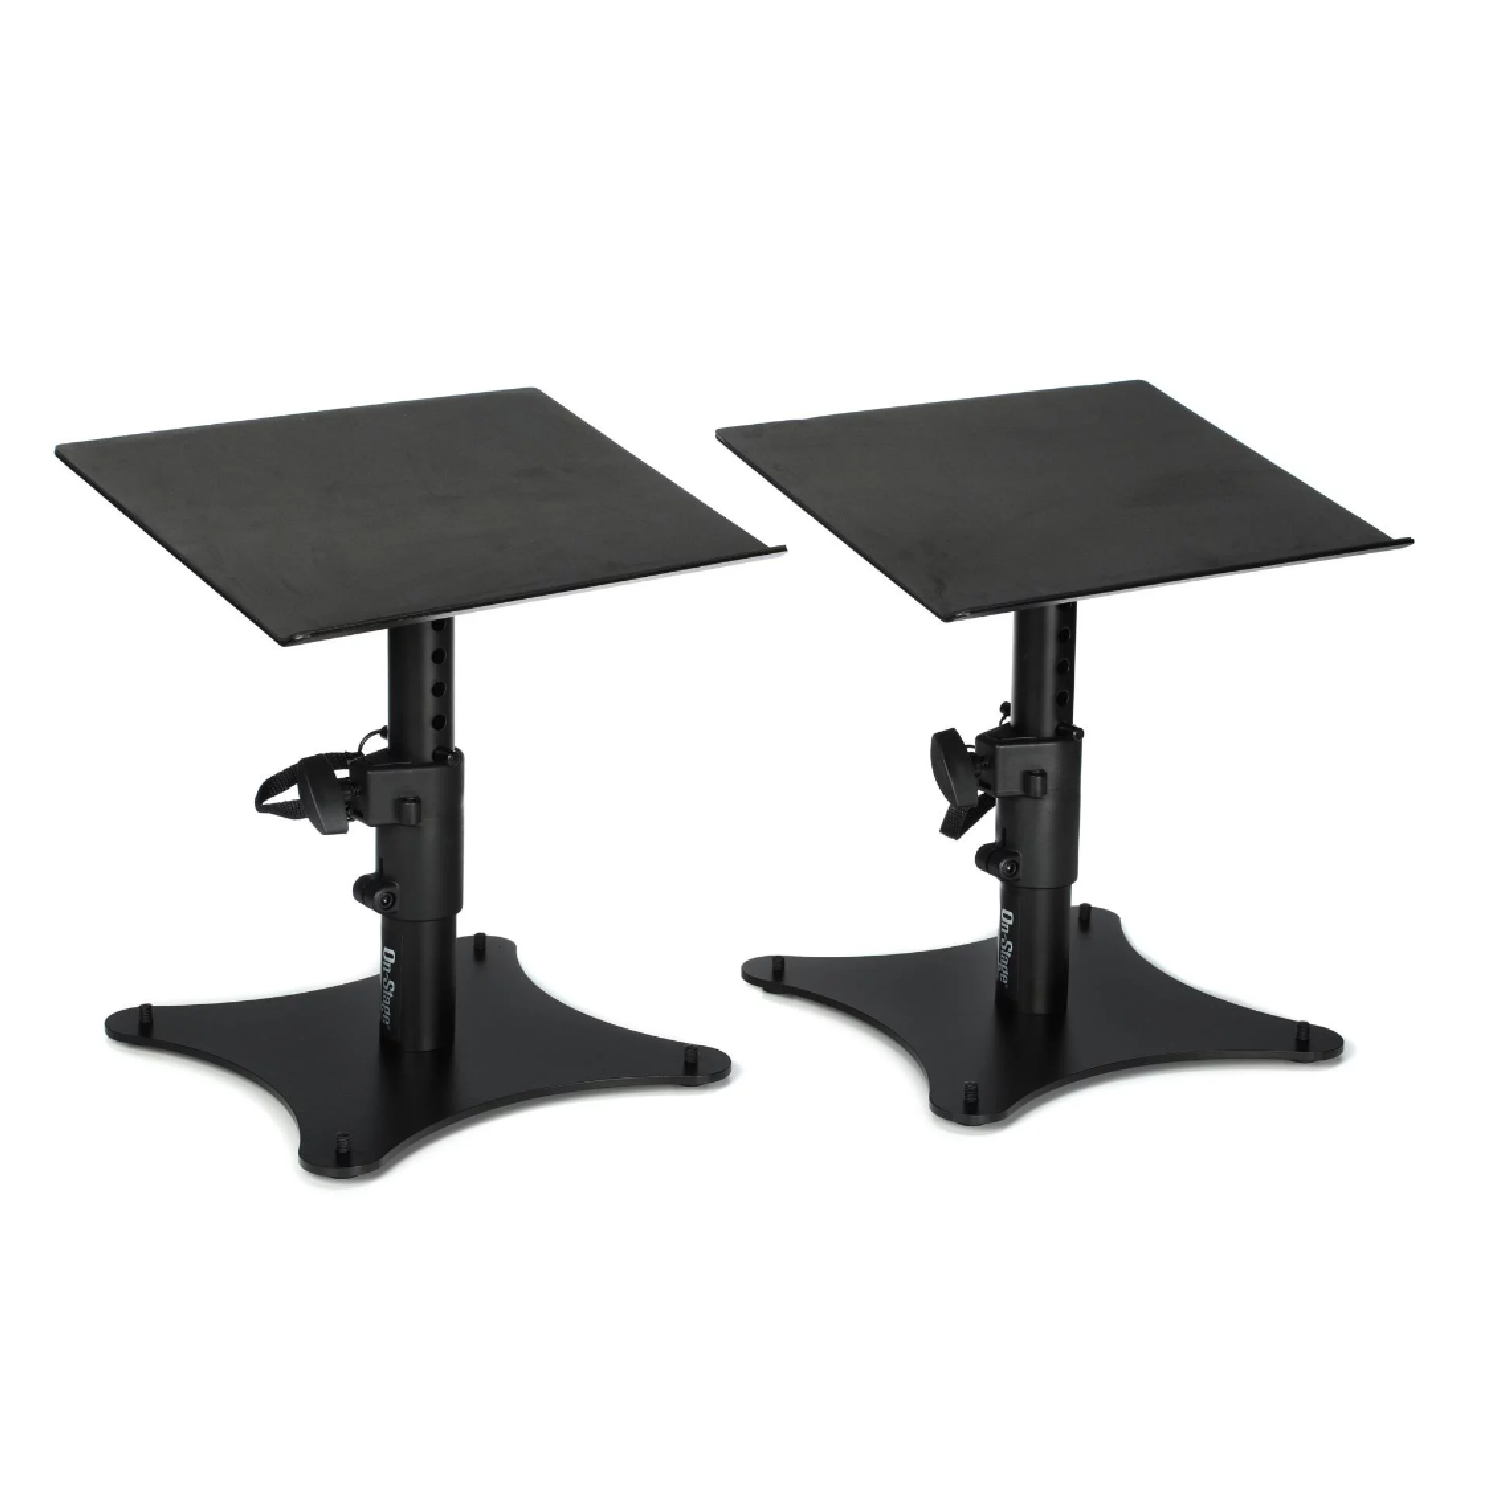 Desktop Monitor Stands 10 Inches x 10 Inches (Sold By Pair)   SMS450P on stage stands